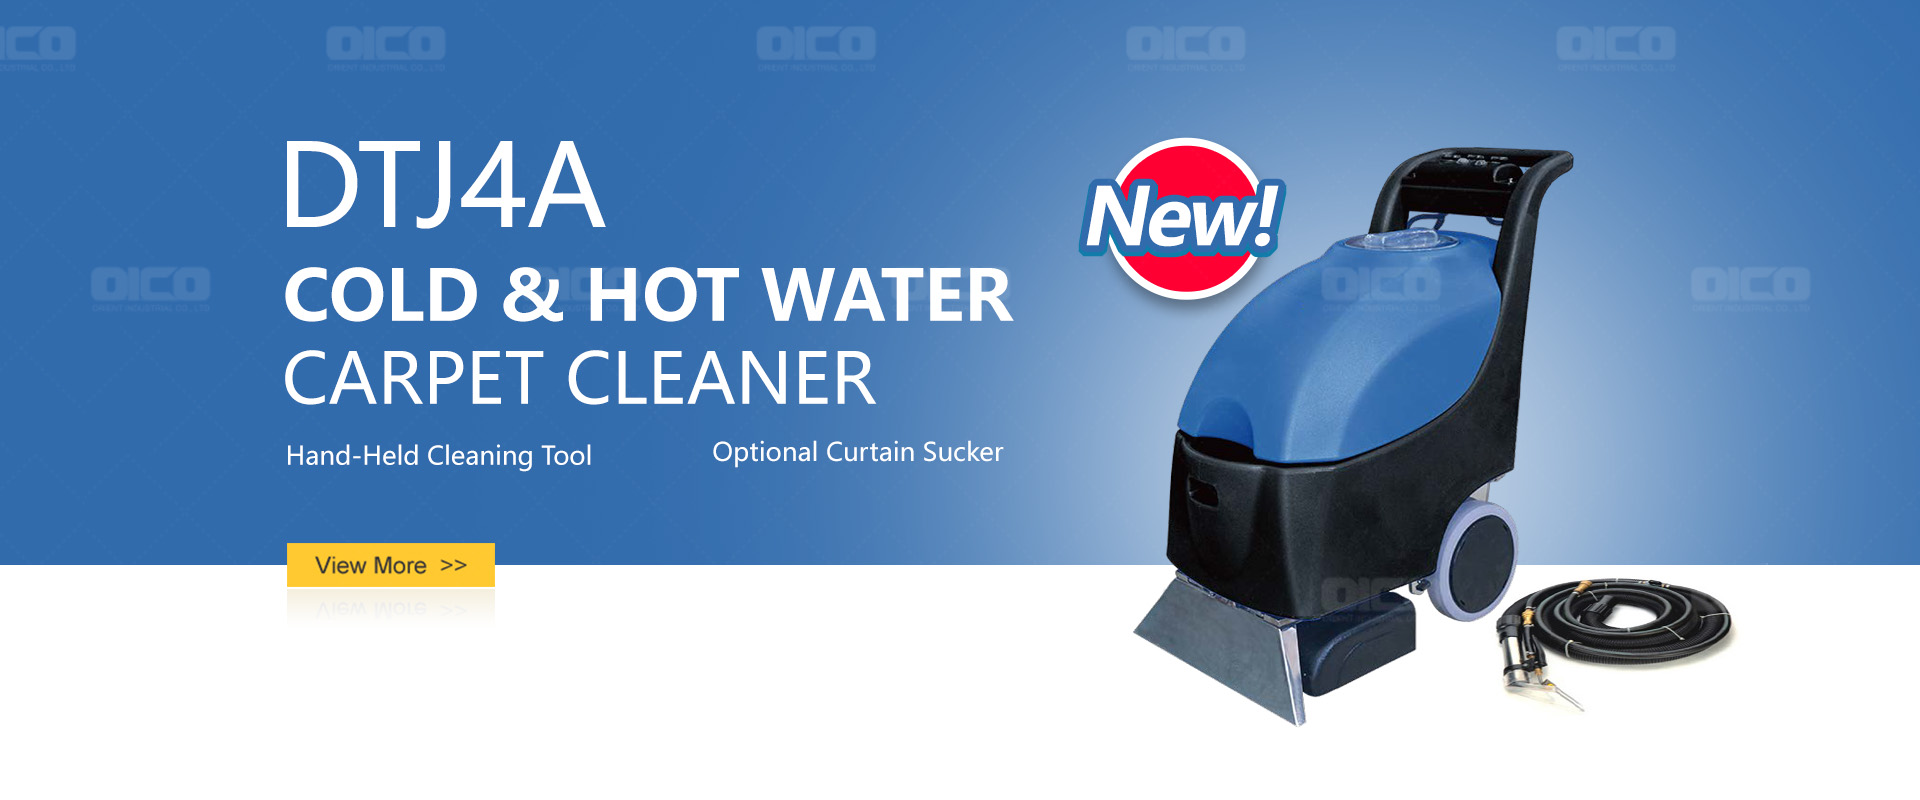 OR-DTJ4A Three-In-One Cold & Hot Water Carpet Cleaner  